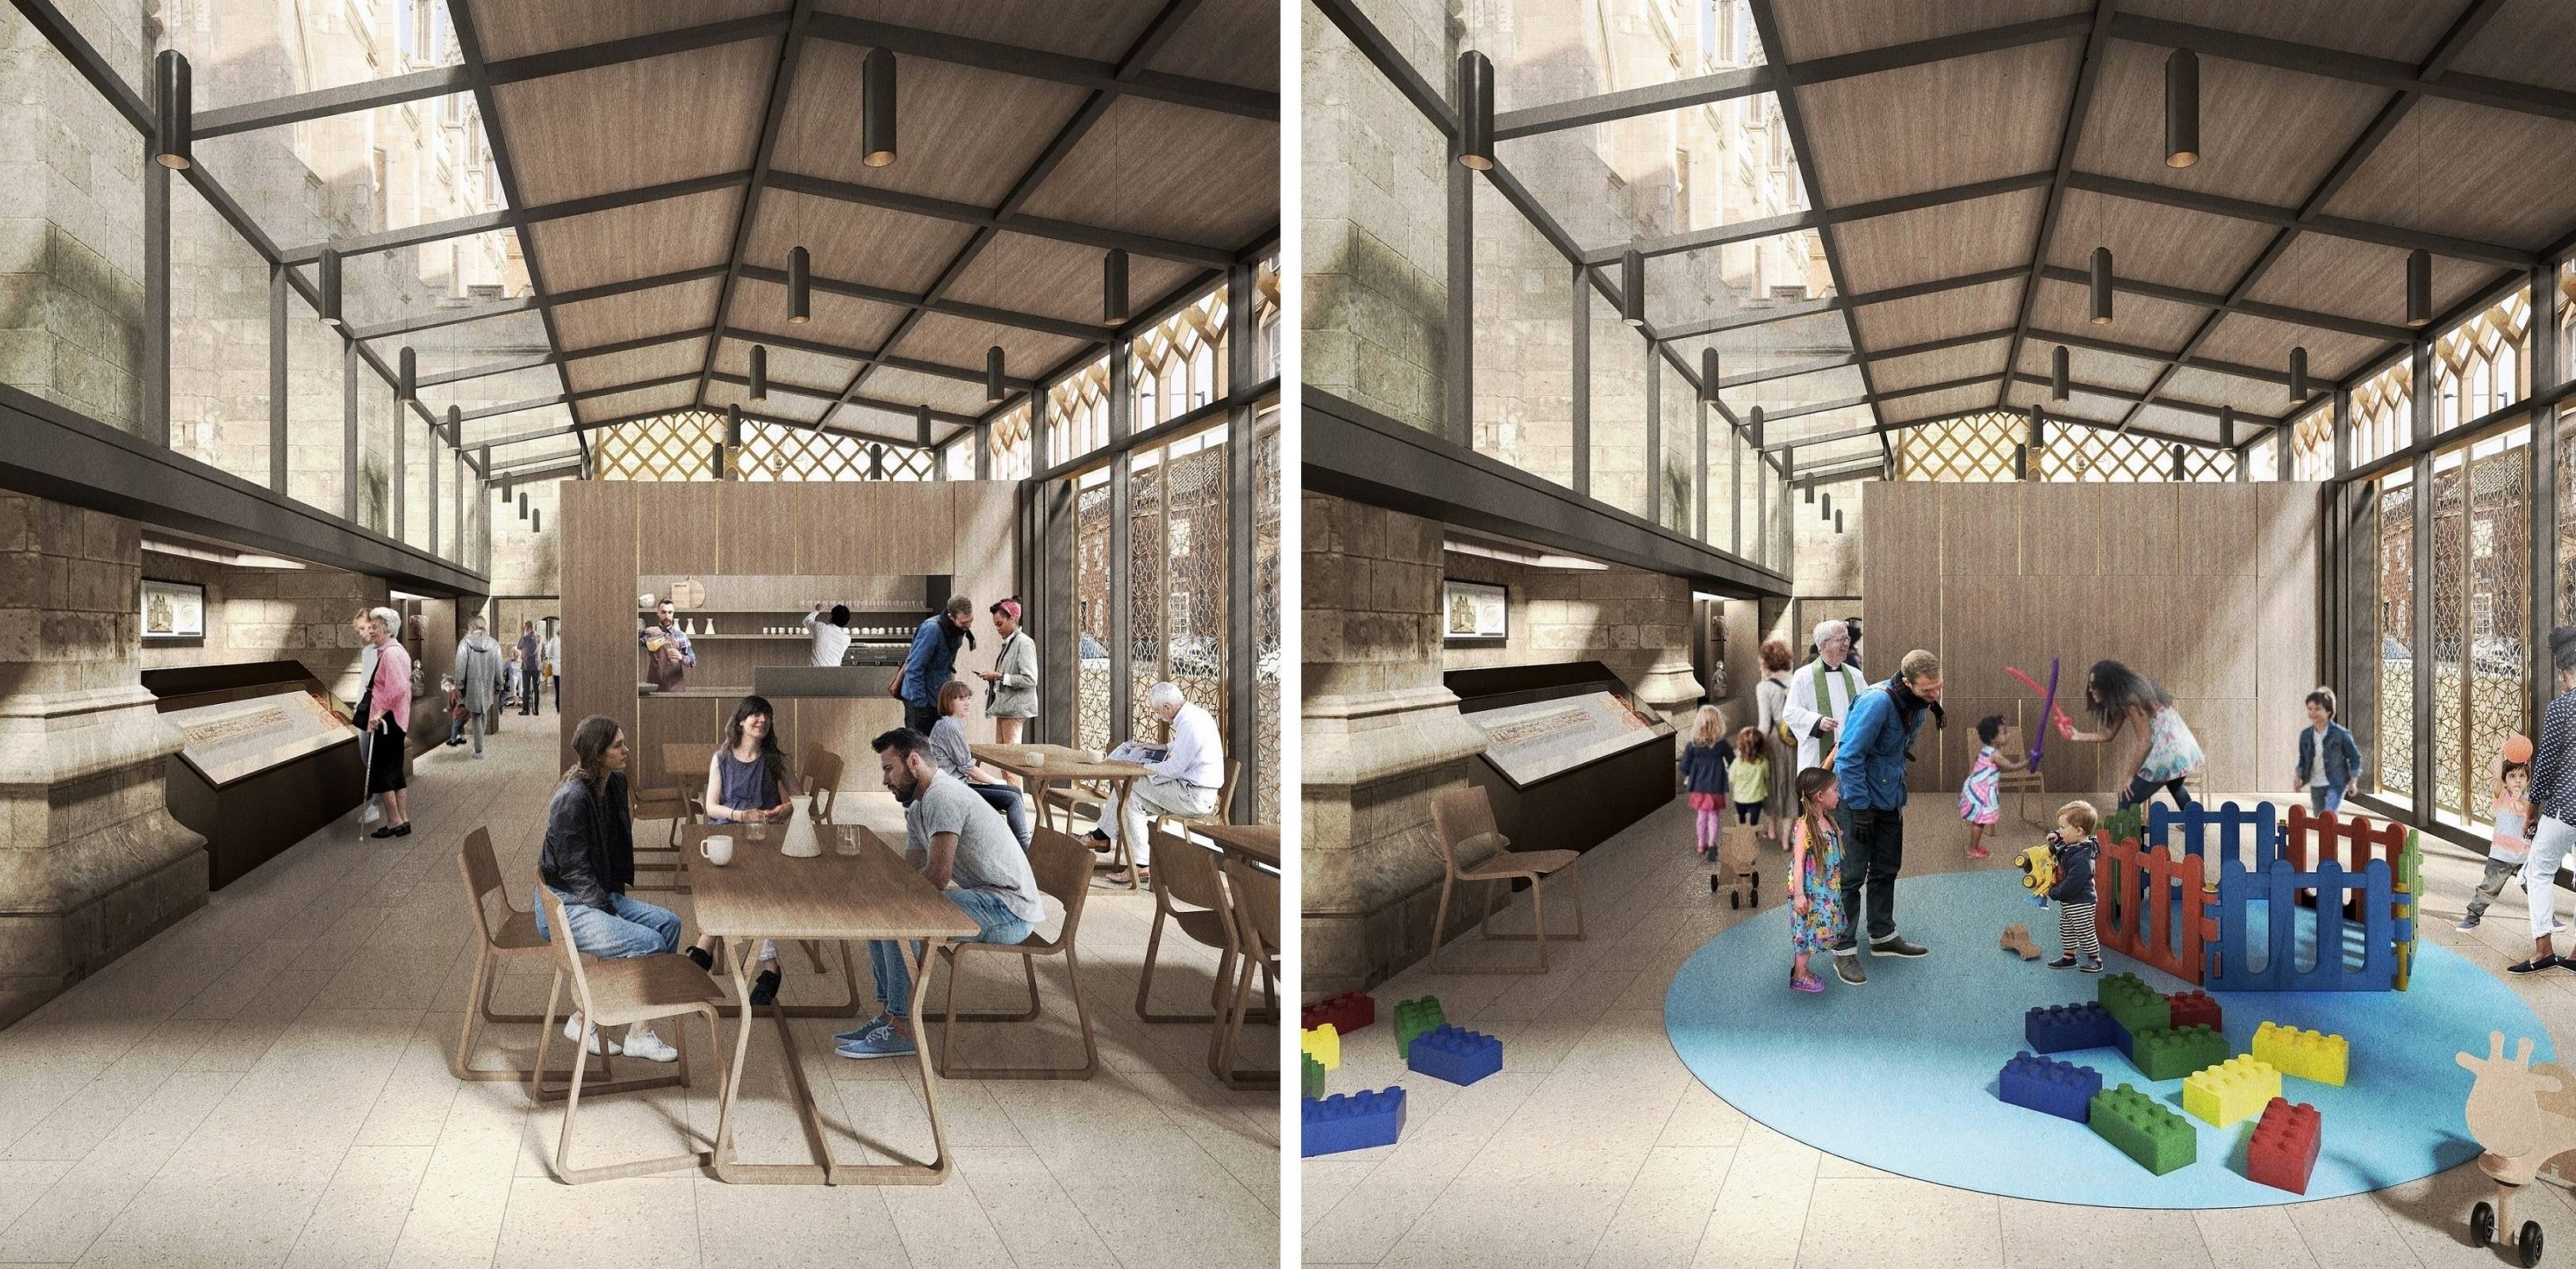 The new visitor and heritage centre will enable Hull Minster to accommodate a broader range of community activities, including for families.